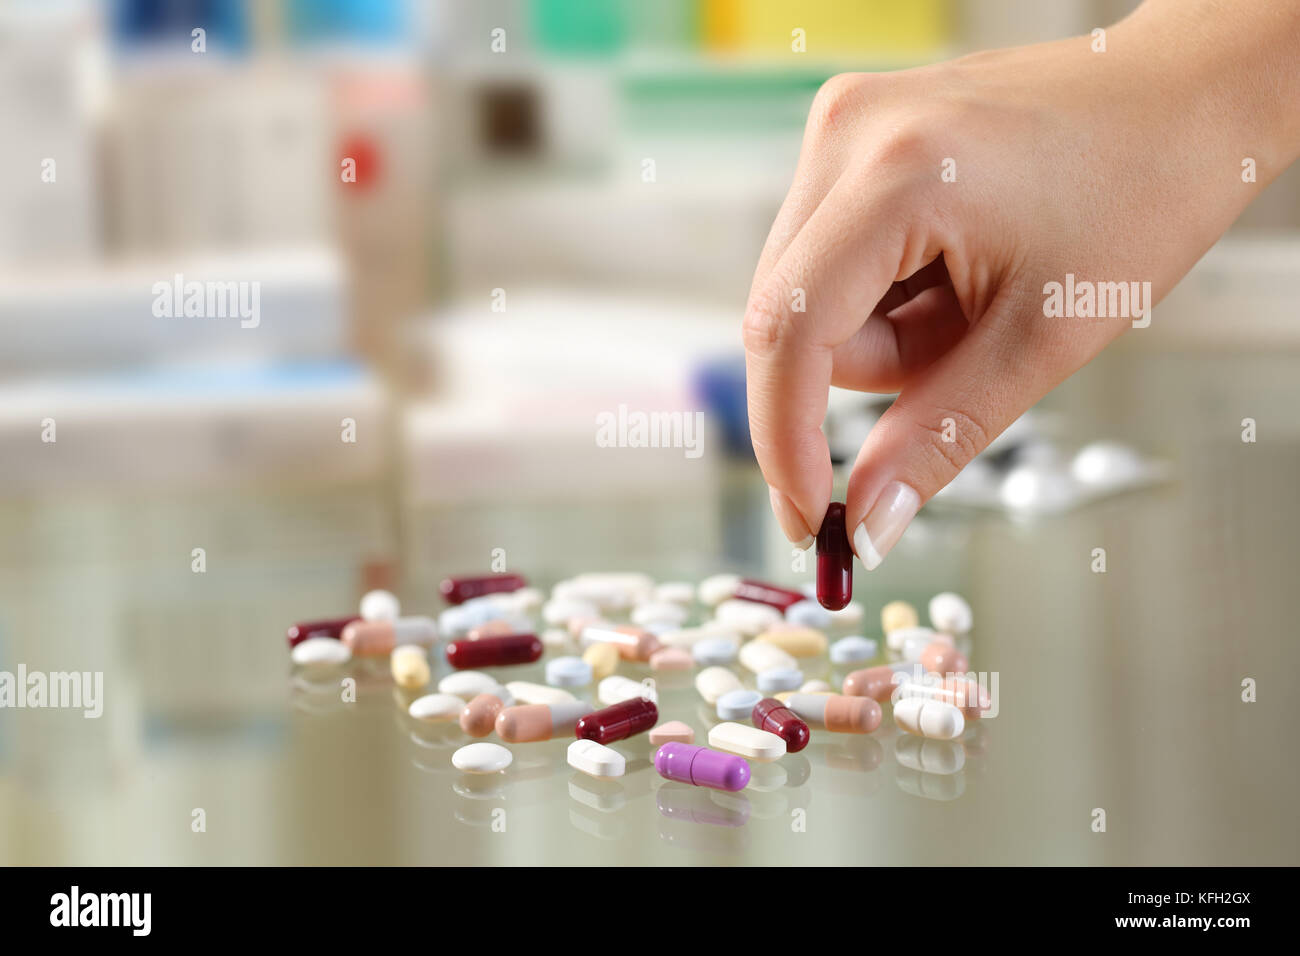 Close up of a woman hand catching a pill from a group of medicines on a glass table Stock Photo